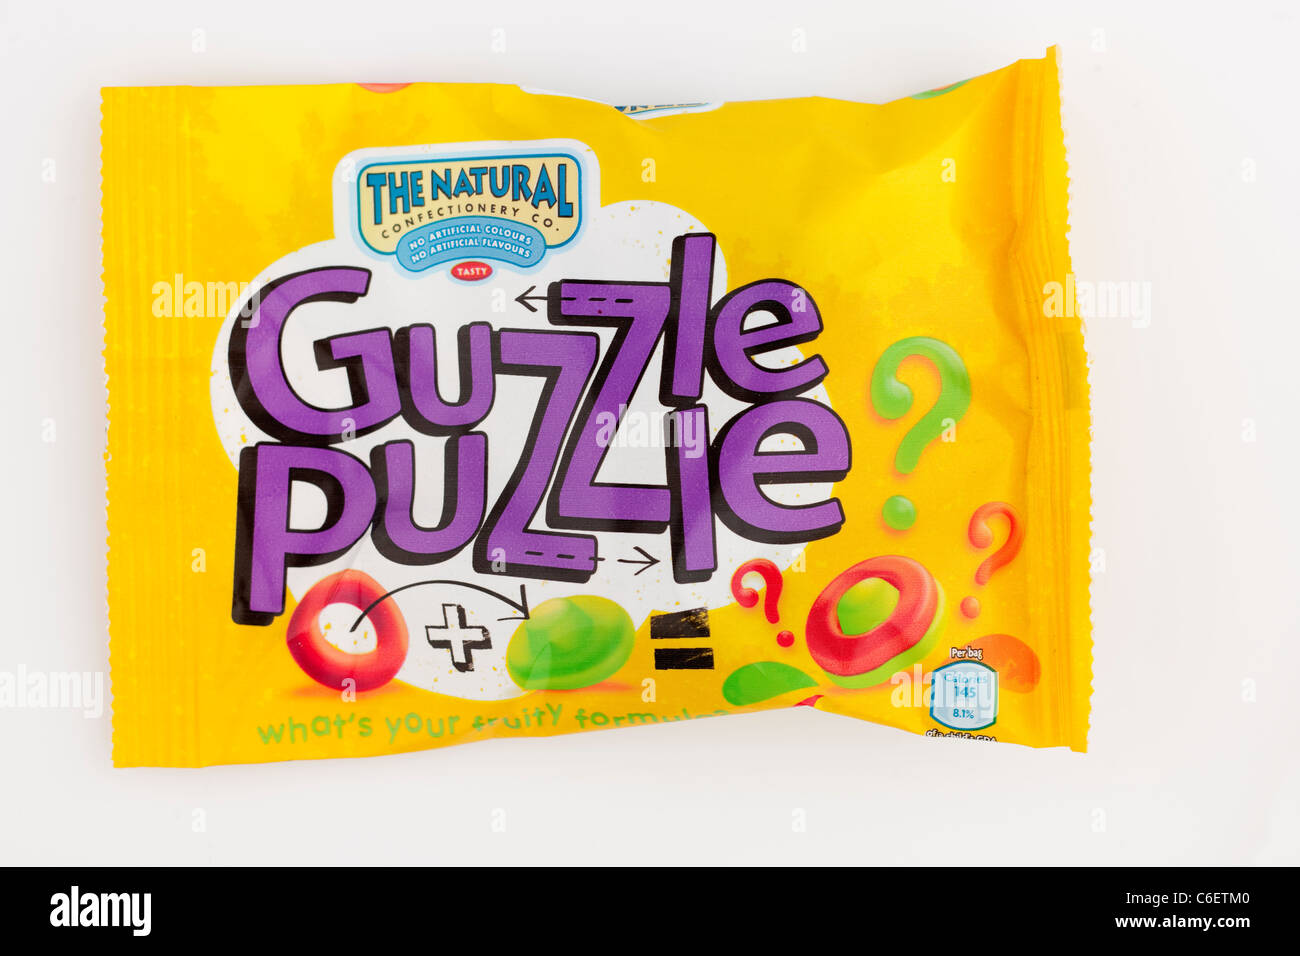 Bag of The Natural confectionery co Guzzle Puzzle childrens chewy gum  sweets Stock Photo - Alamy